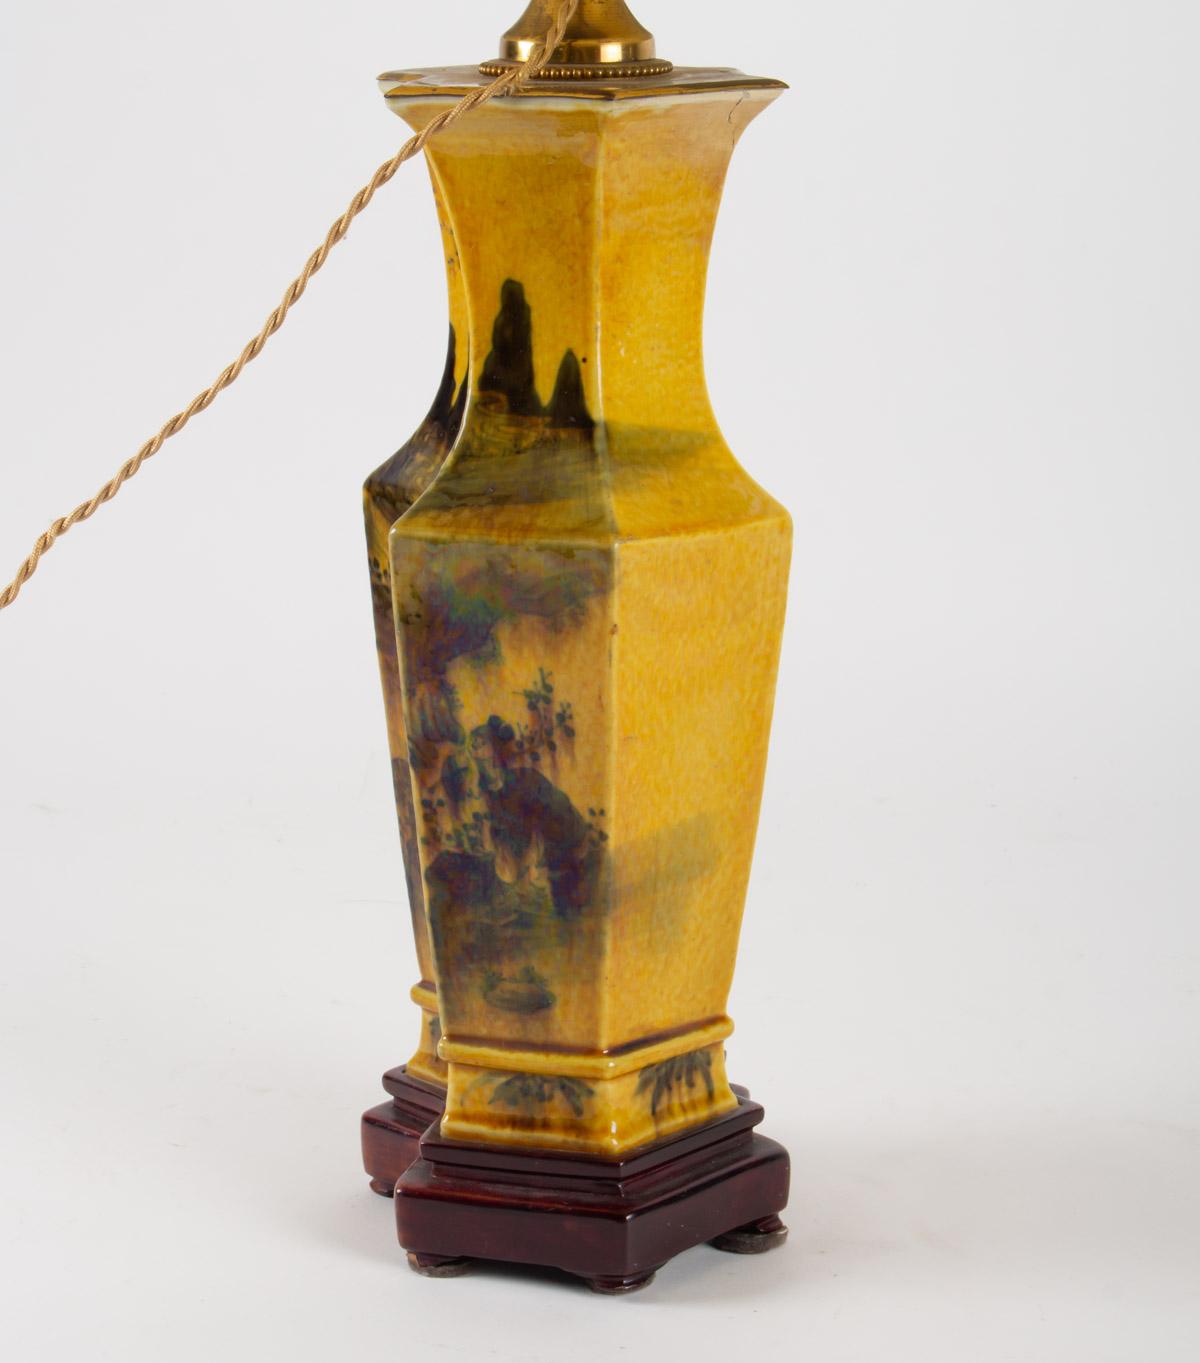 19th Century Lamp, China Porcelain, Asia, 19th or Early 20th Century